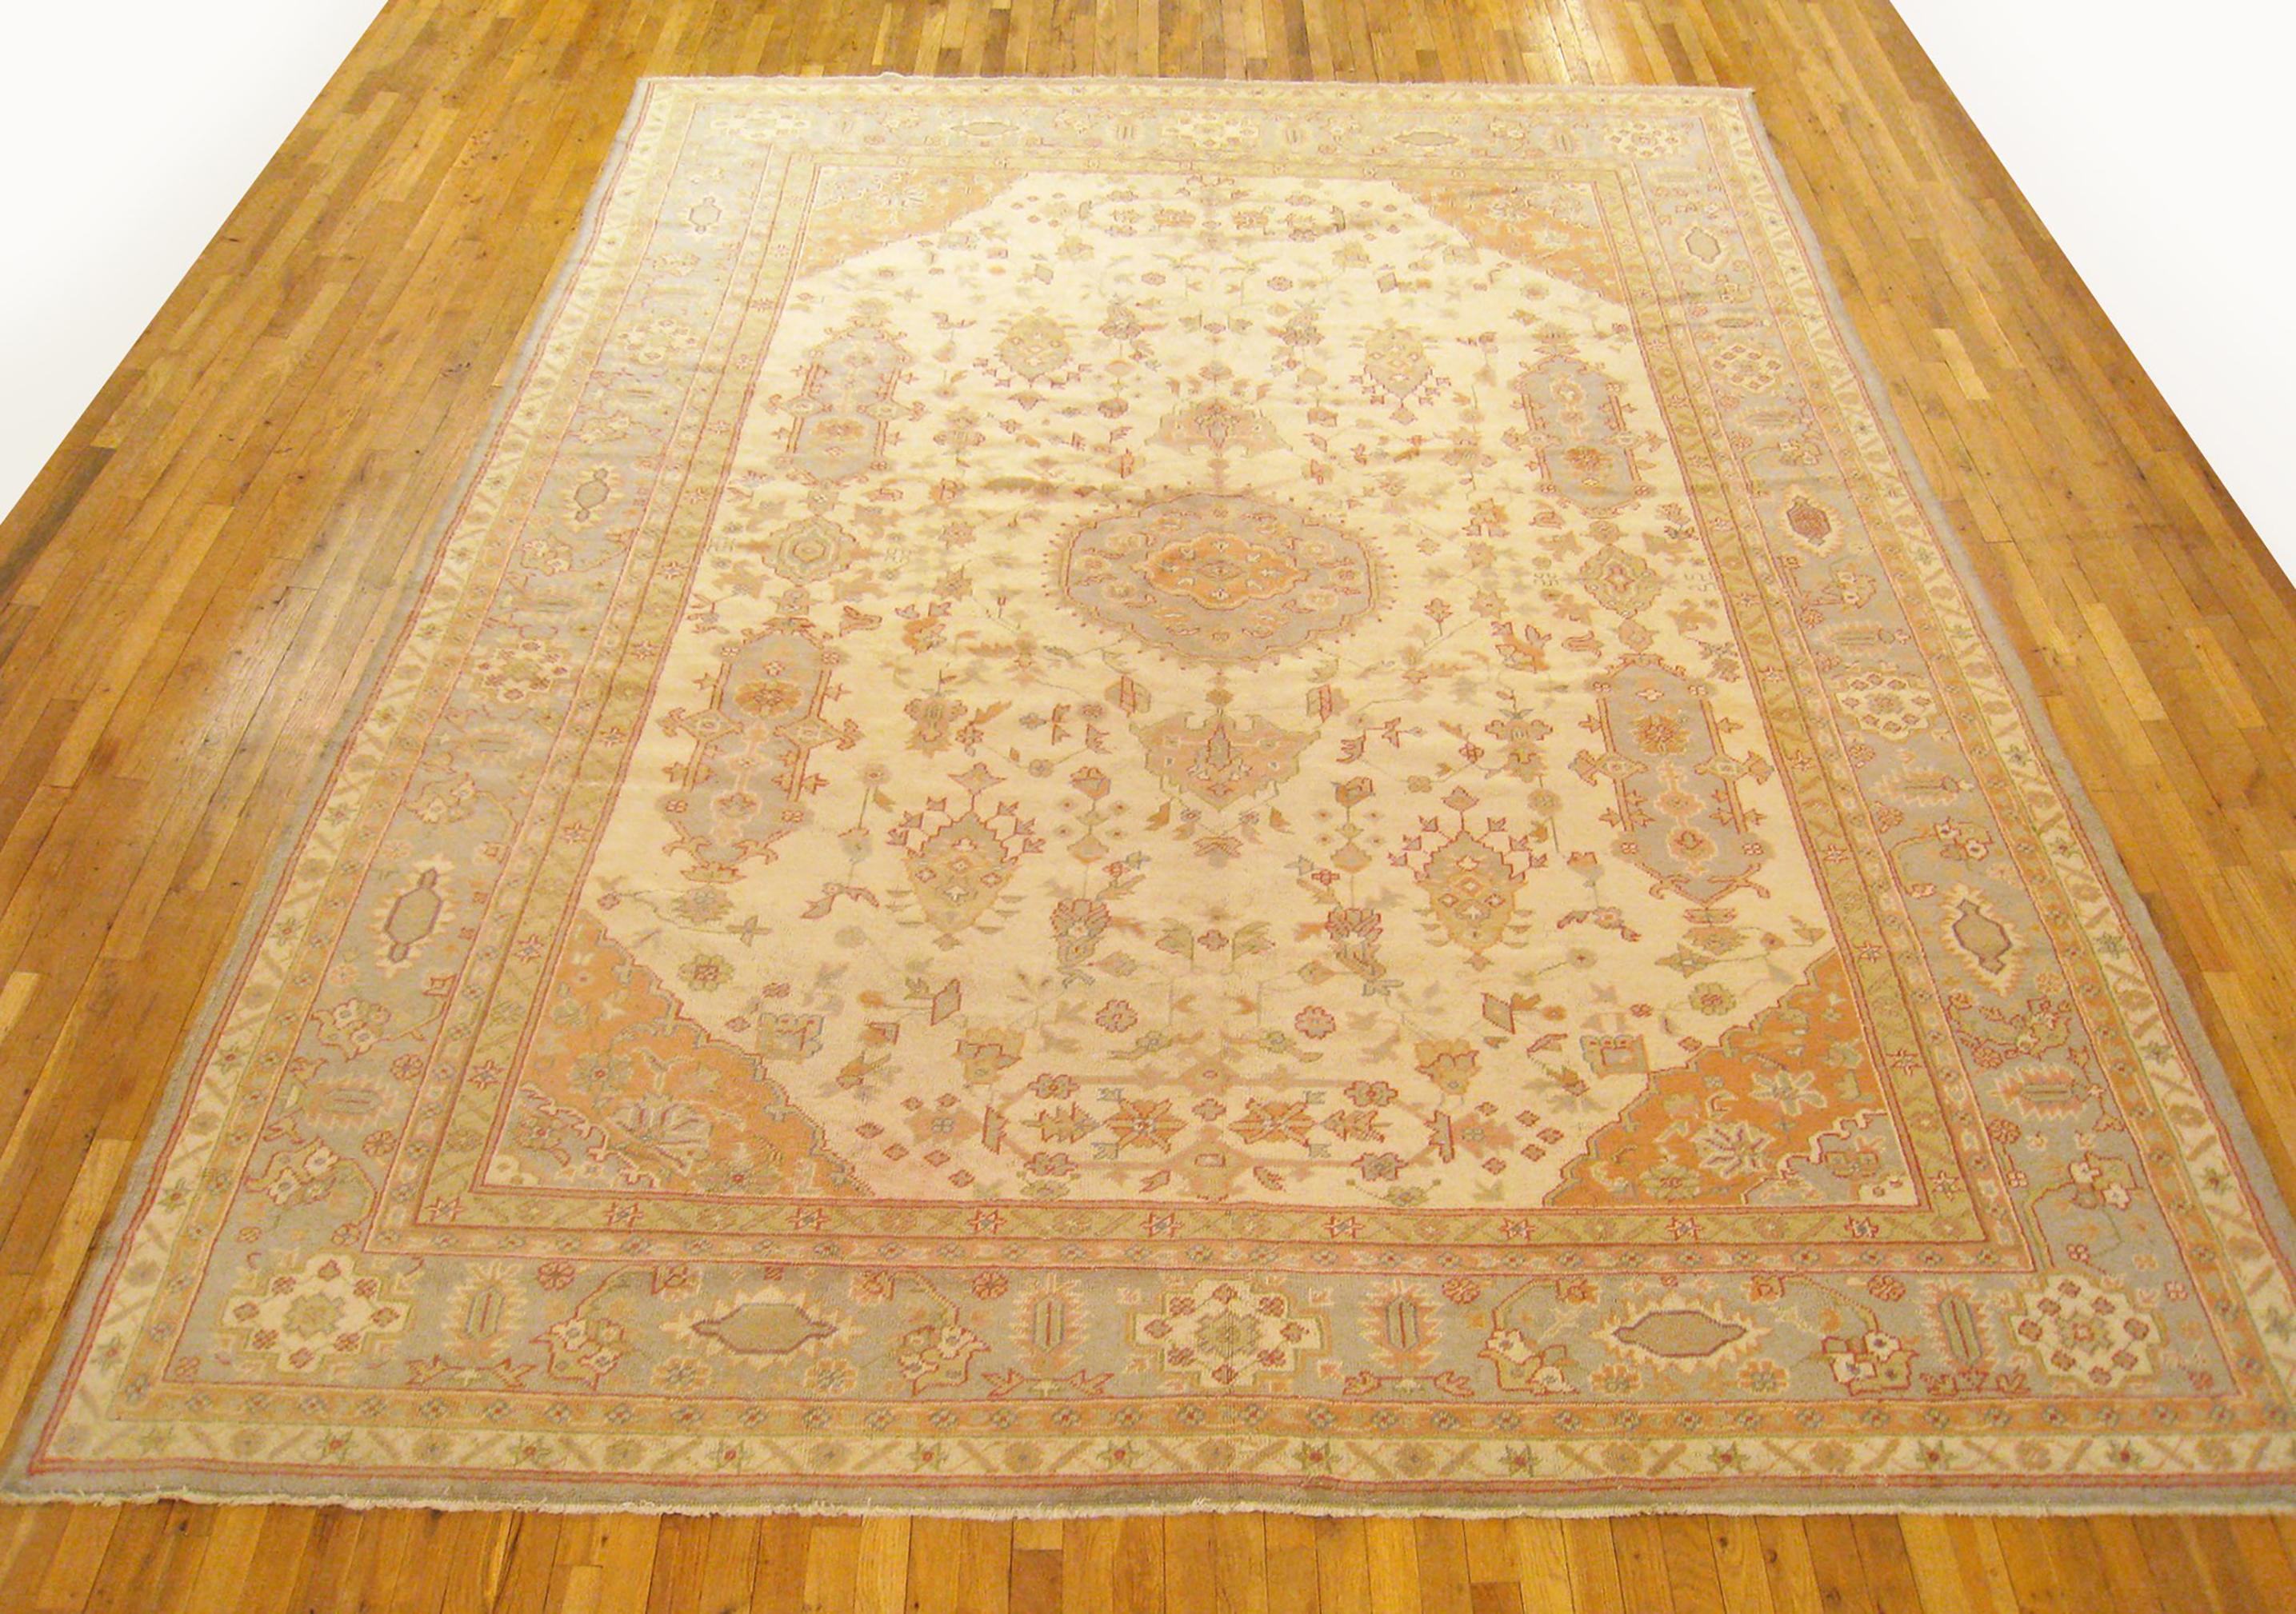 Antique Turkish Oushak decorative oriental carpet, room size, with ivory field.

A gorgeous antique Turkish Oushak carpet, circa 1920, size 13'4